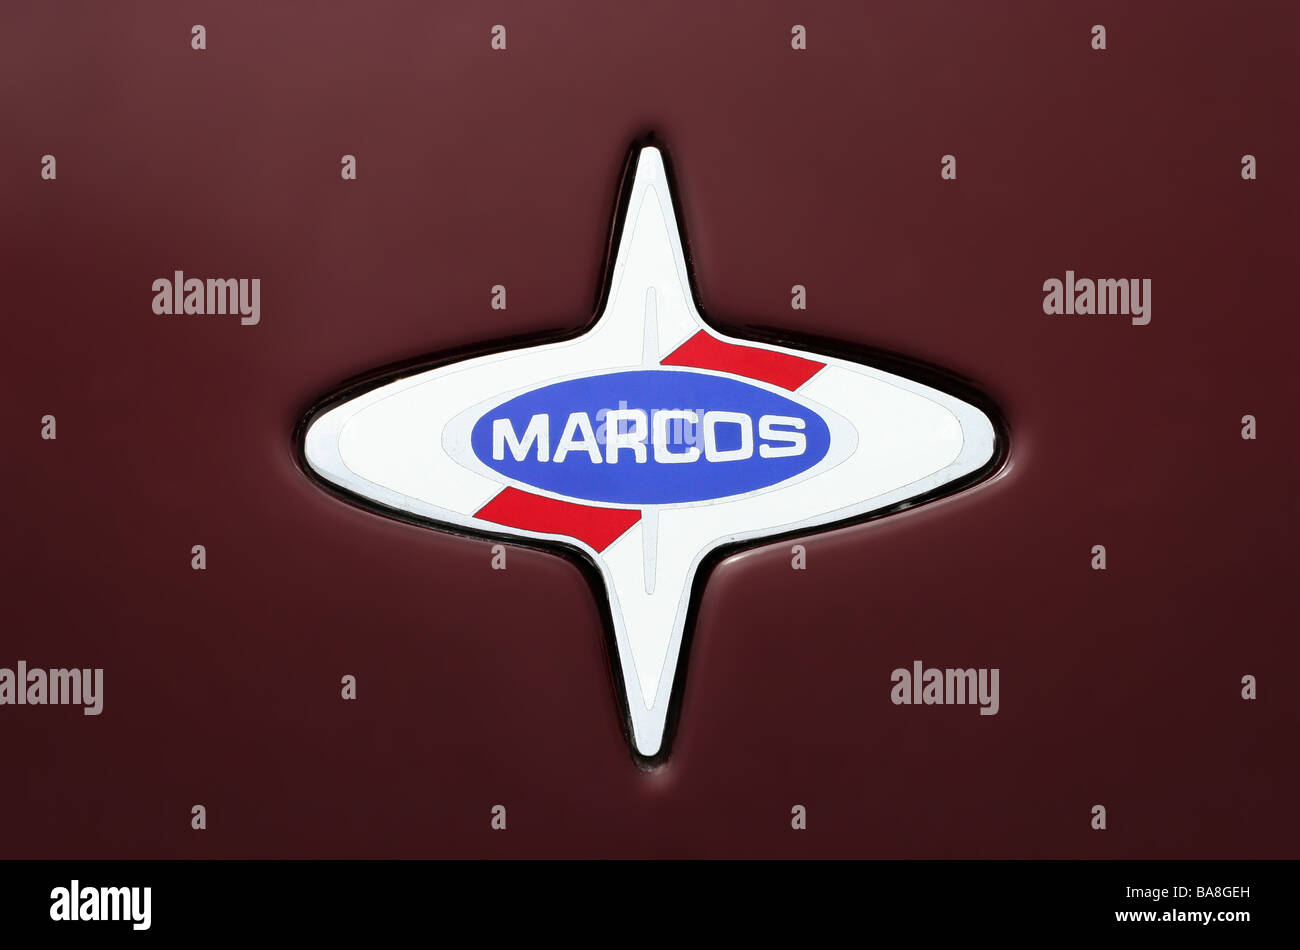 Badge / logo of the defunct Great British sportscar manufacturer Marcos Stock Photo